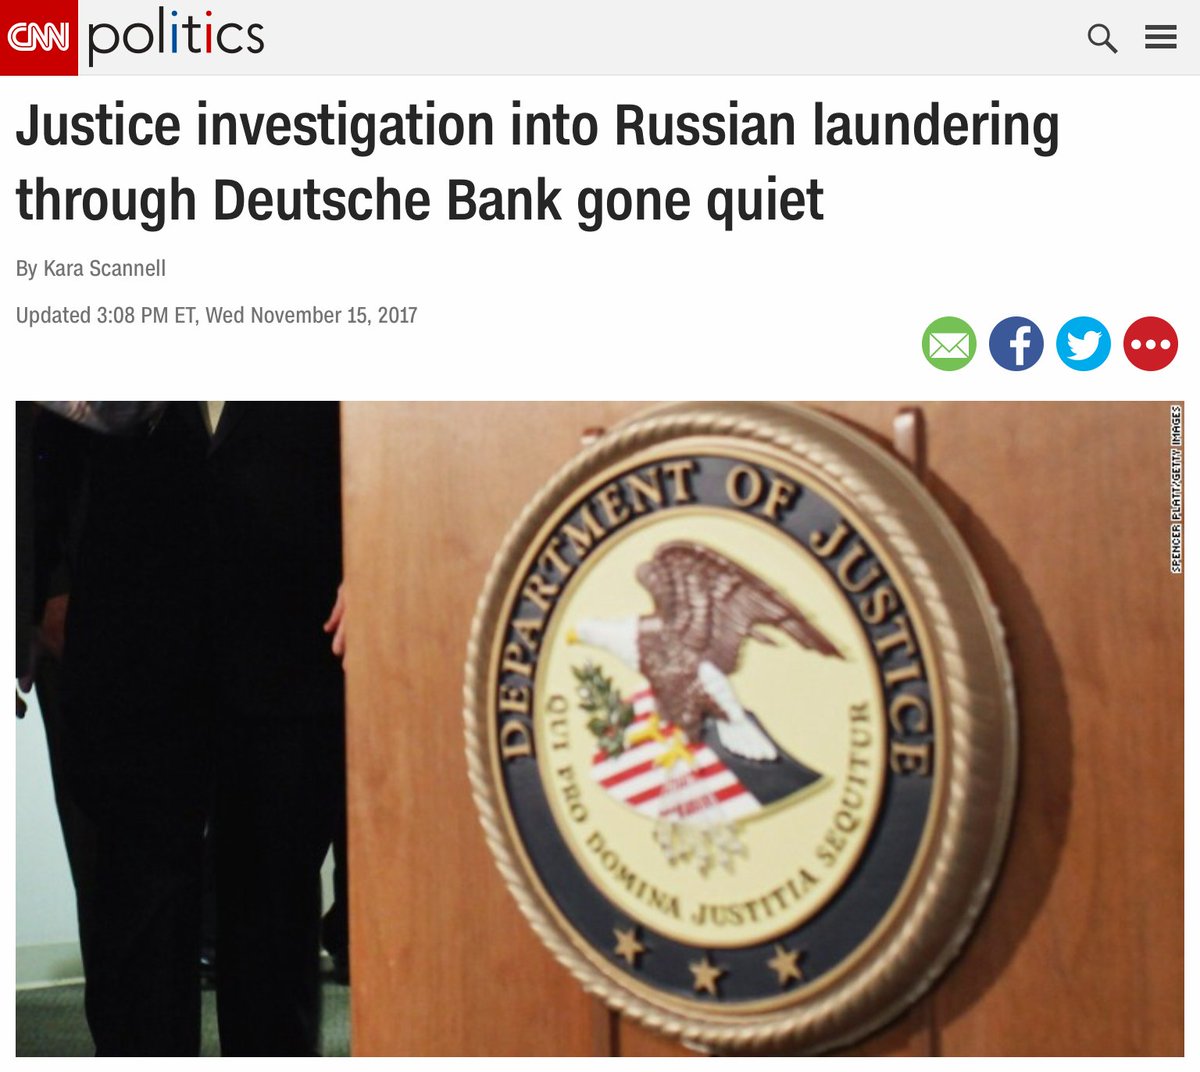 Here are some articles about the Justice Dept and their leniency towards Deutsche Bank.